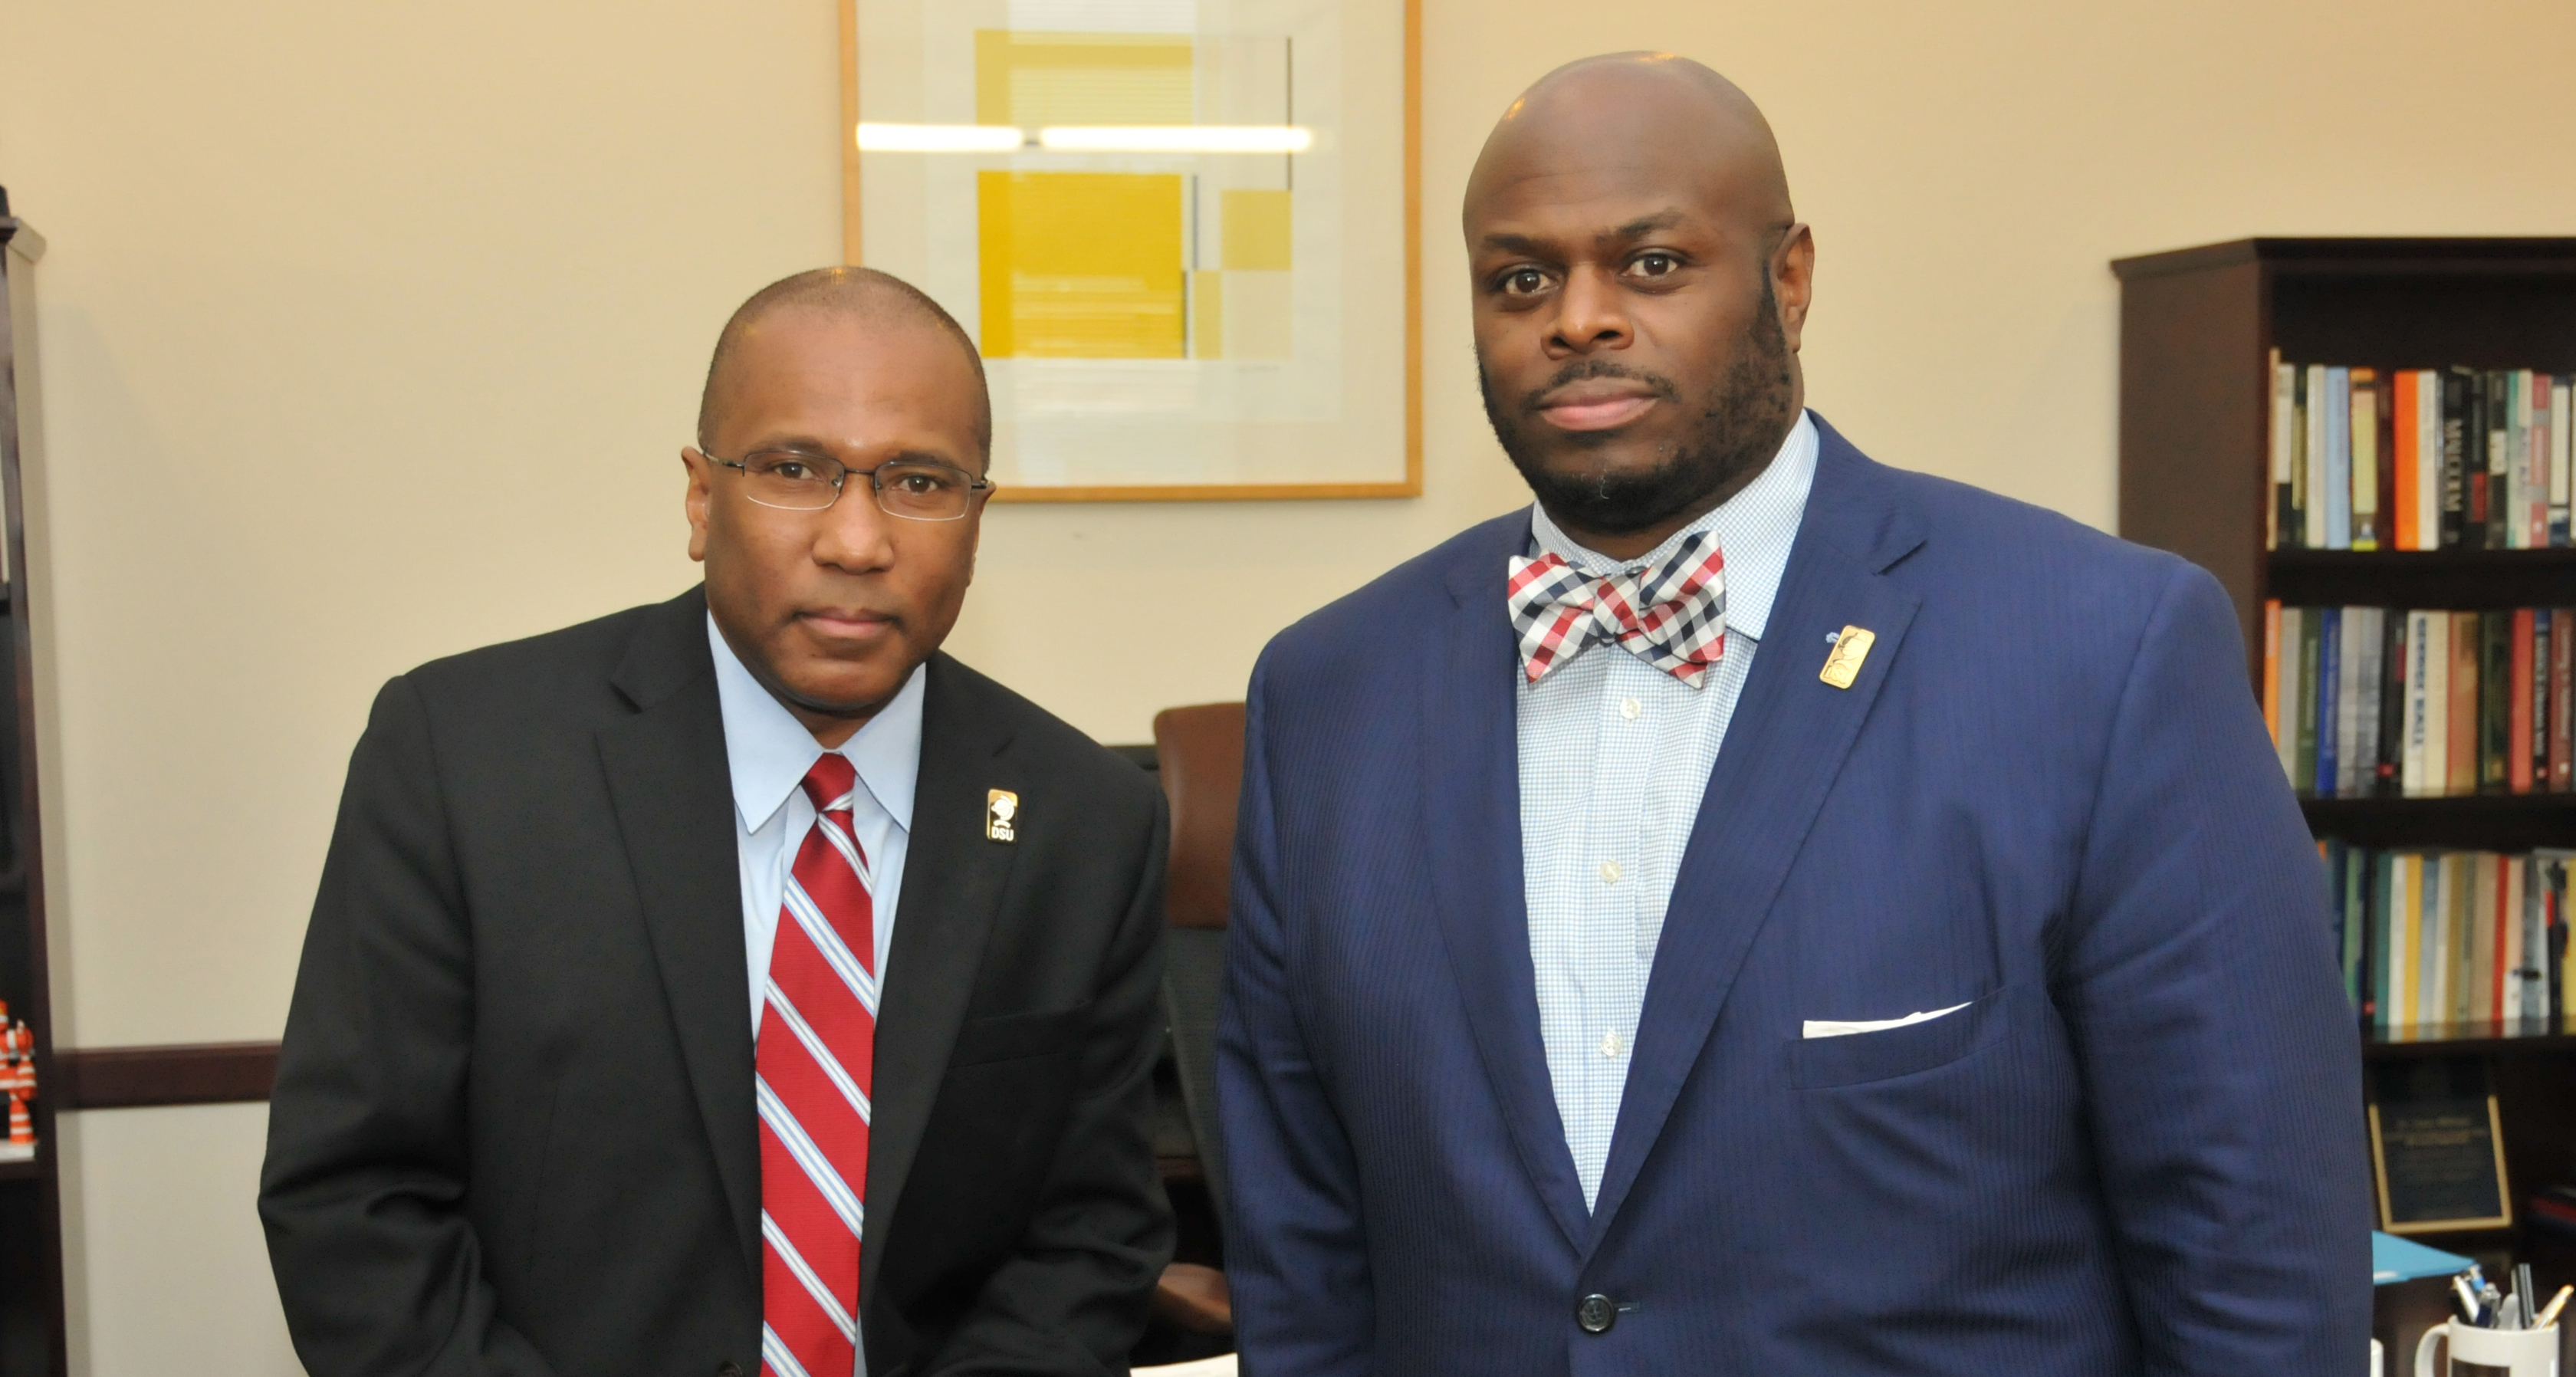 (L-r) DSU President Harry L. Williams and DSU Provost Tony Allen say in a joint statement about Charlottesville that DSU stands in solidarity with those people of all backgrounds who bravely faced hatred of the white supremacist groups last weekend.